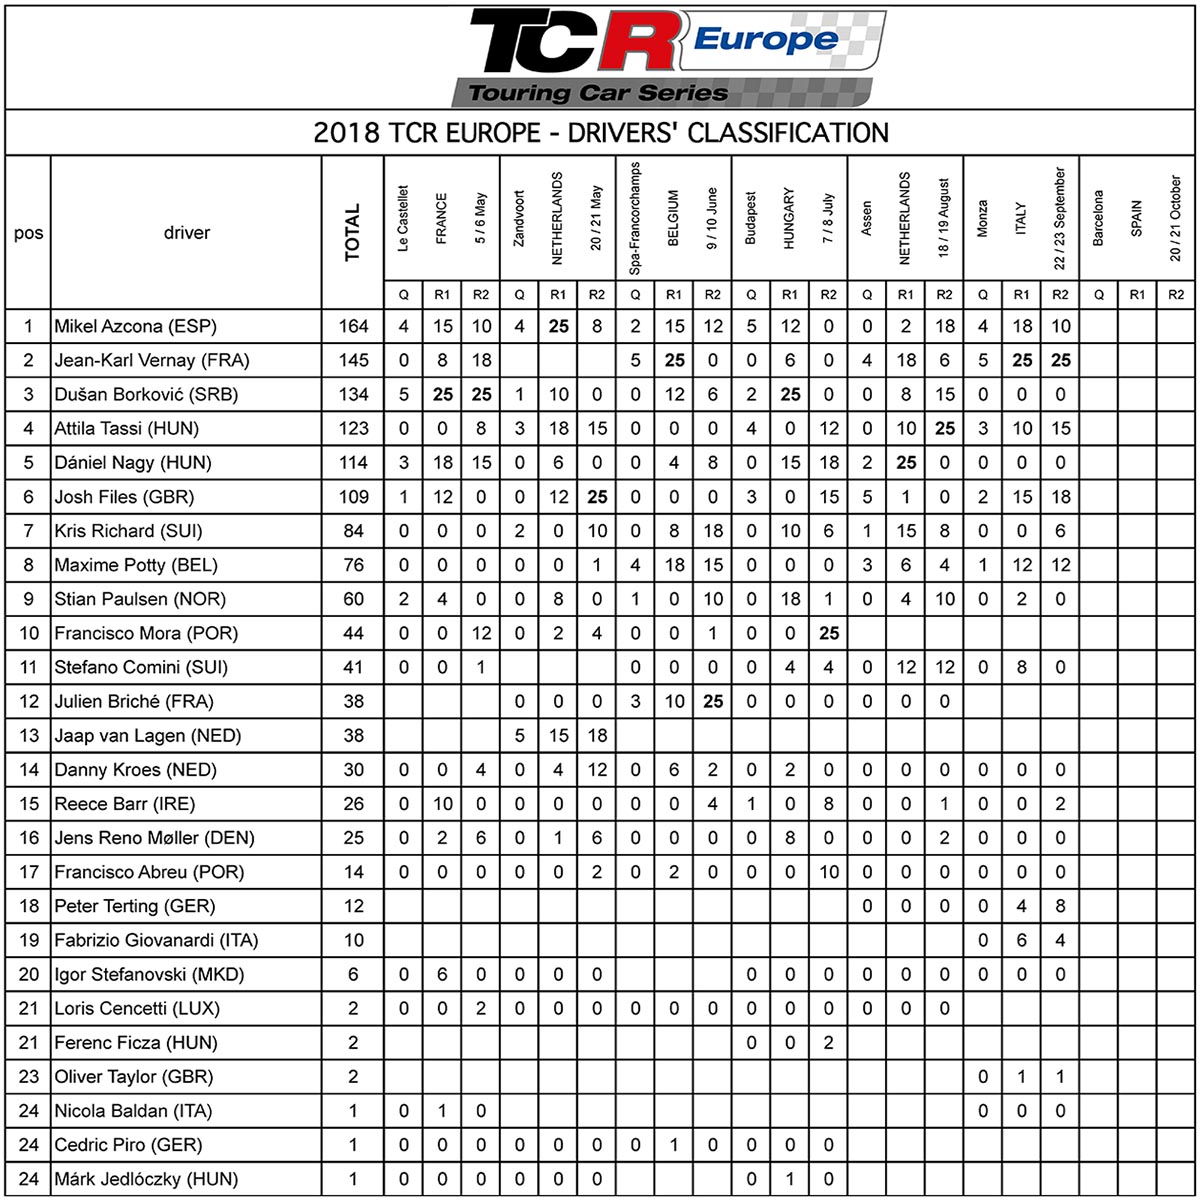 Leaders to Montmelo